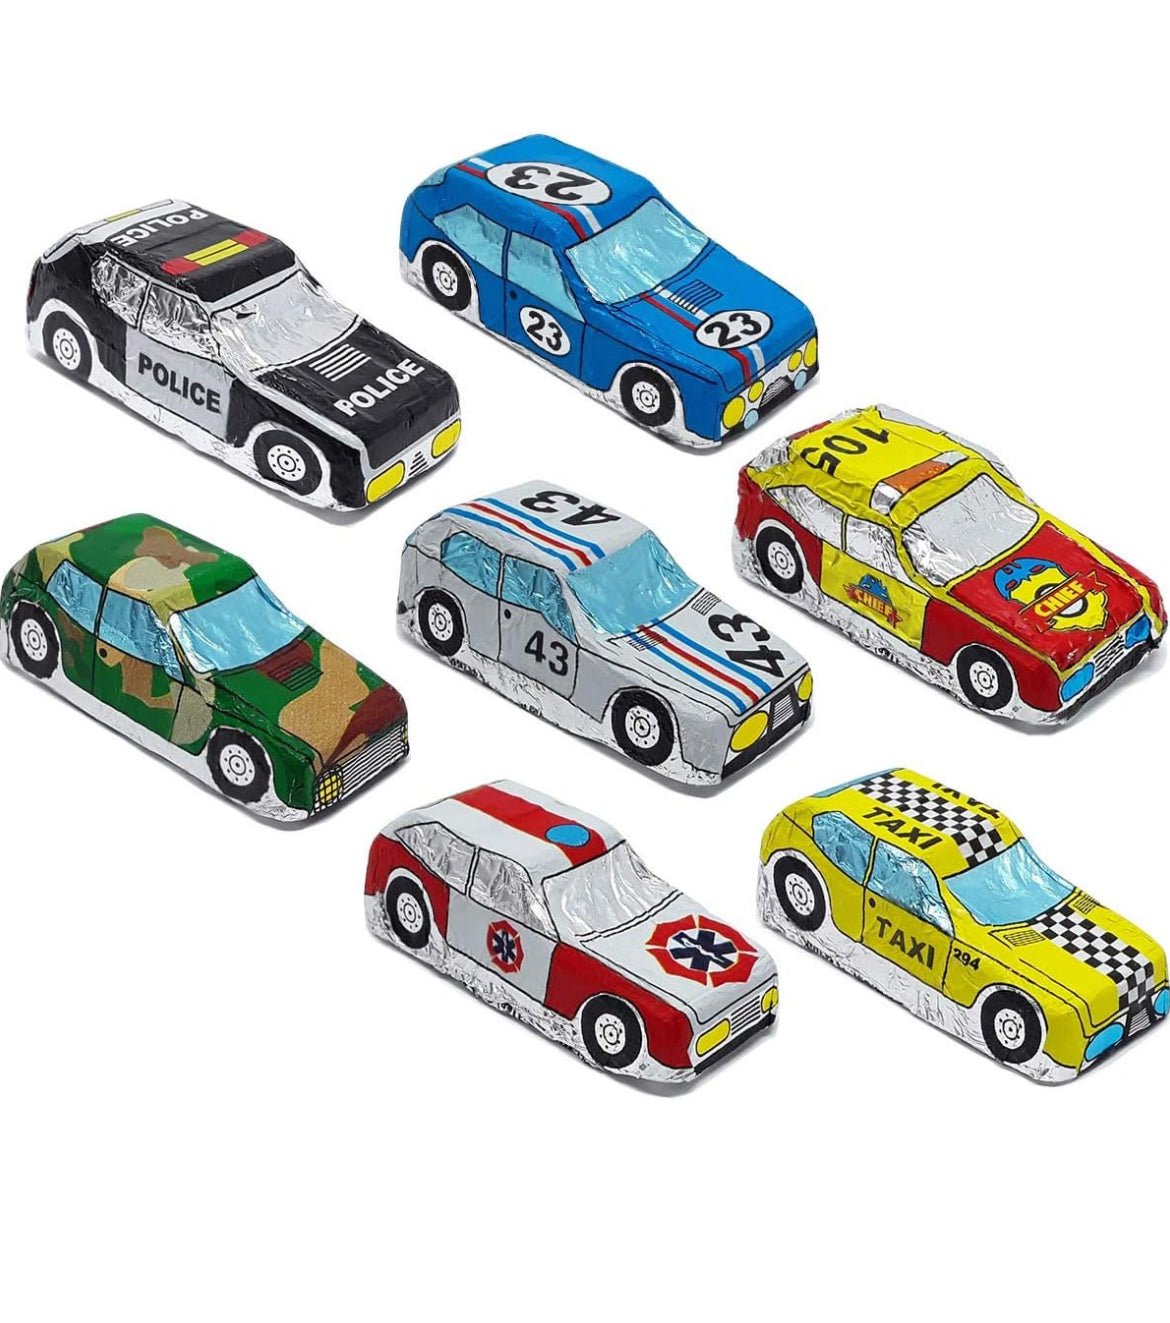 4 Cars (foil wrapped chocolate cars) - Nandy's Candy4 Cars (foil wrapped chocolate cars)